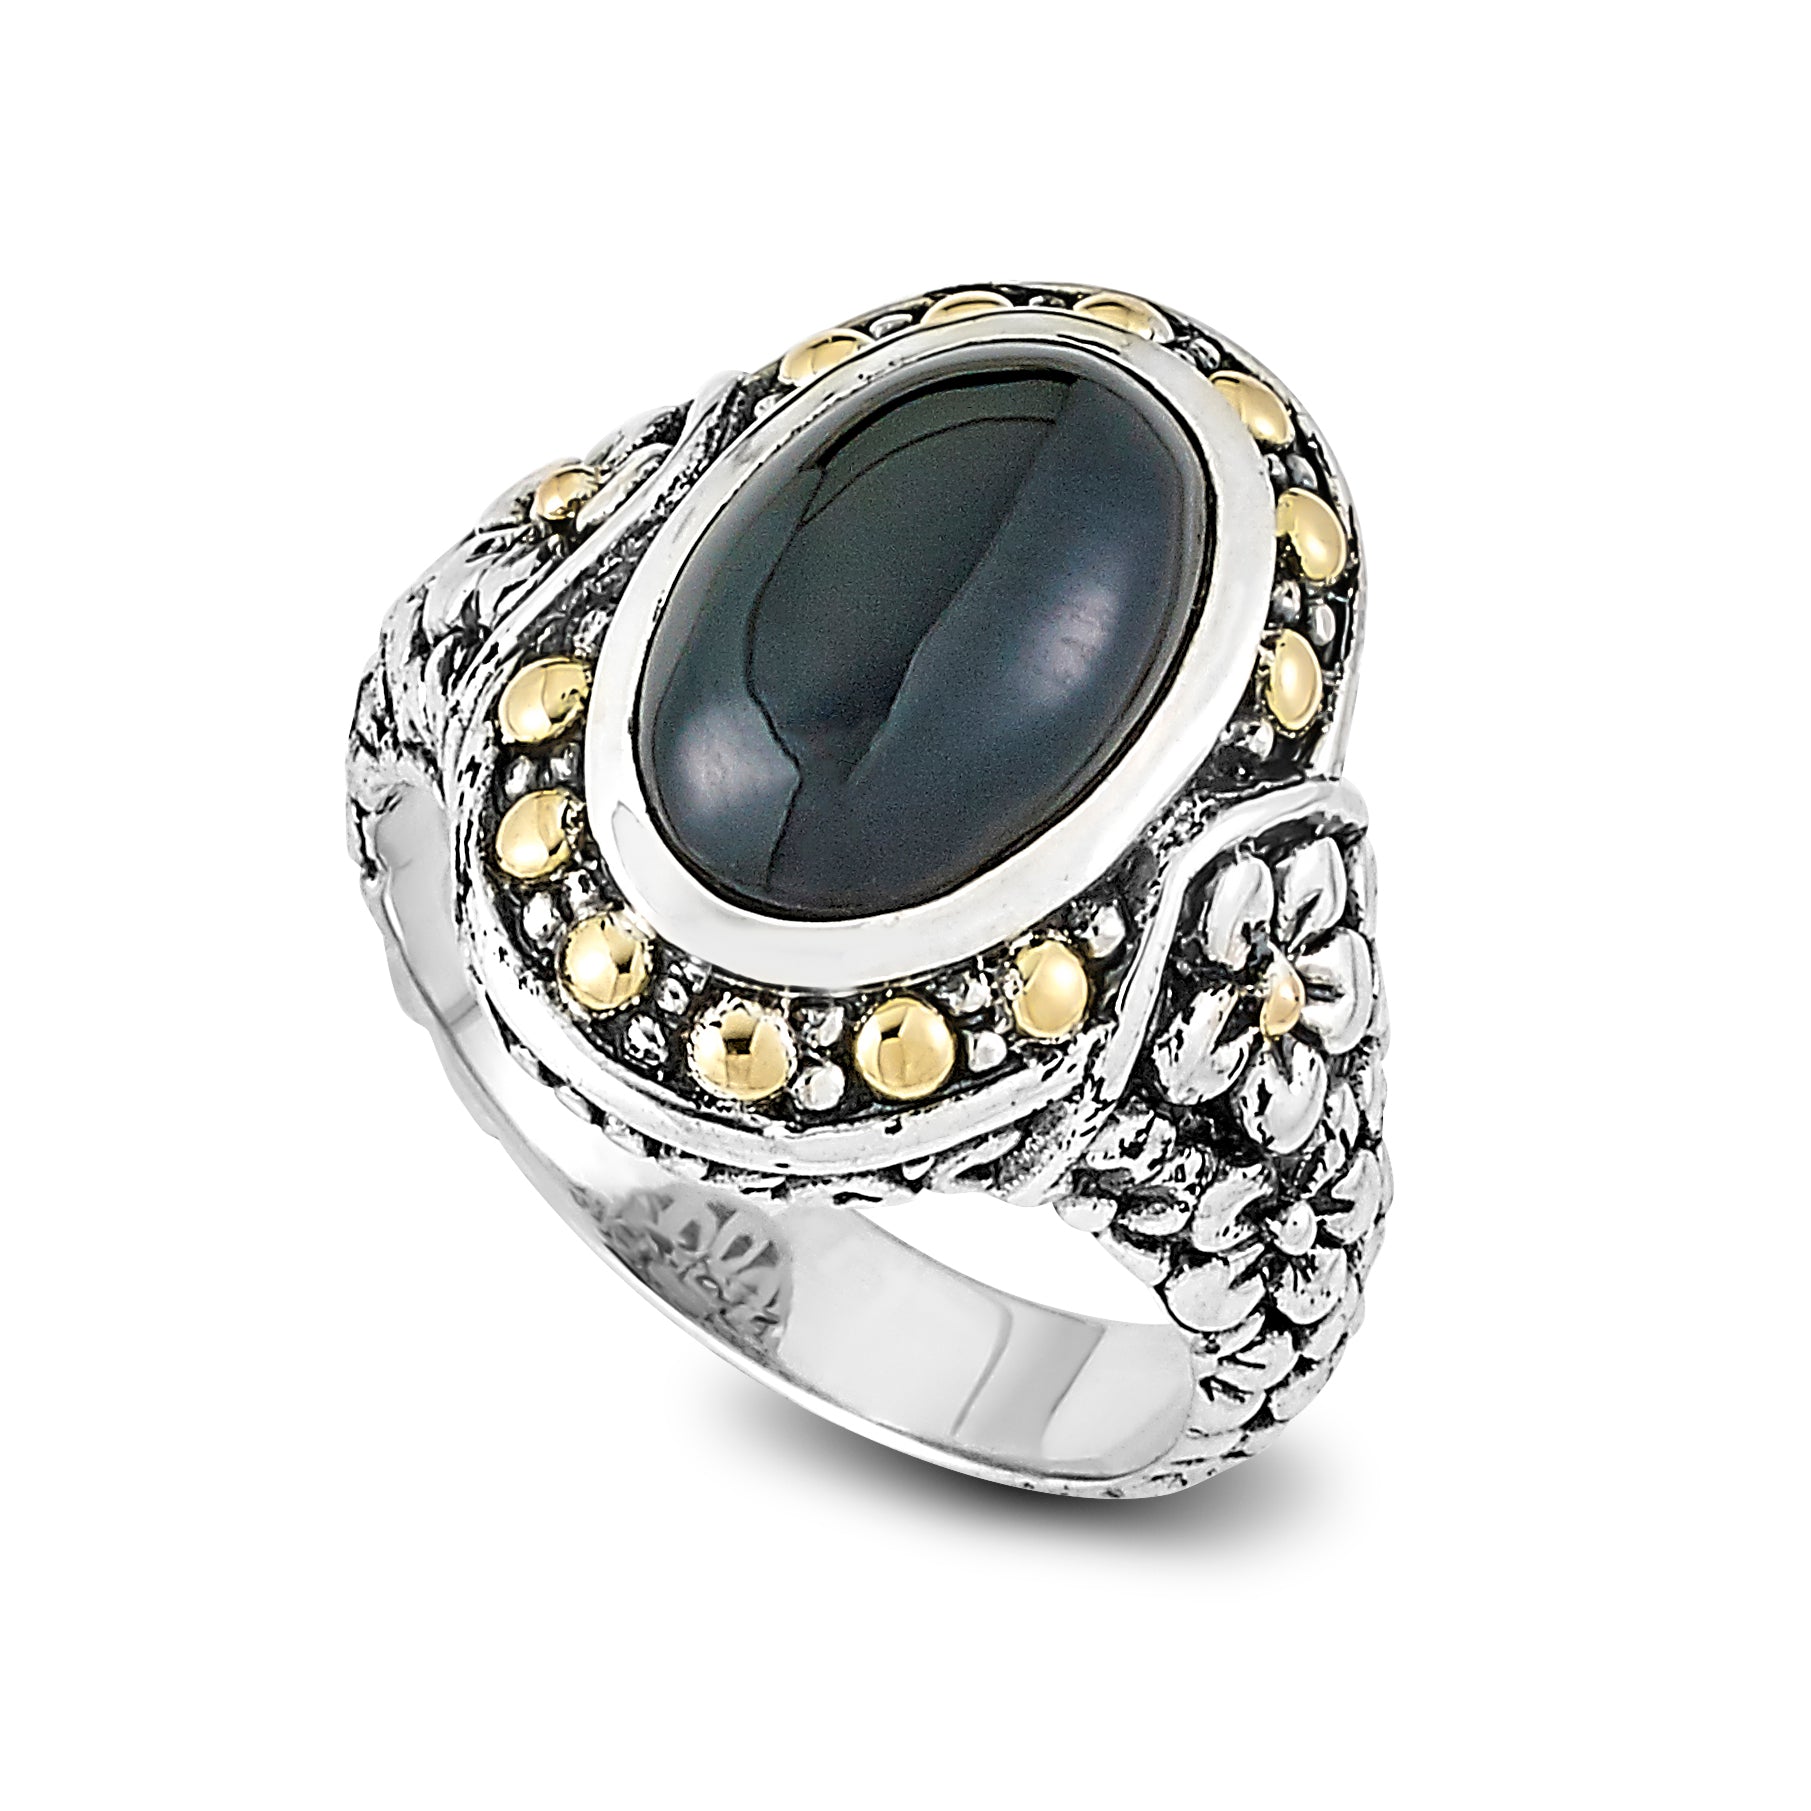 Samuel B. Sterling Silver and 18K Yellow Gold Onyx Ring, Size 7 (97376)